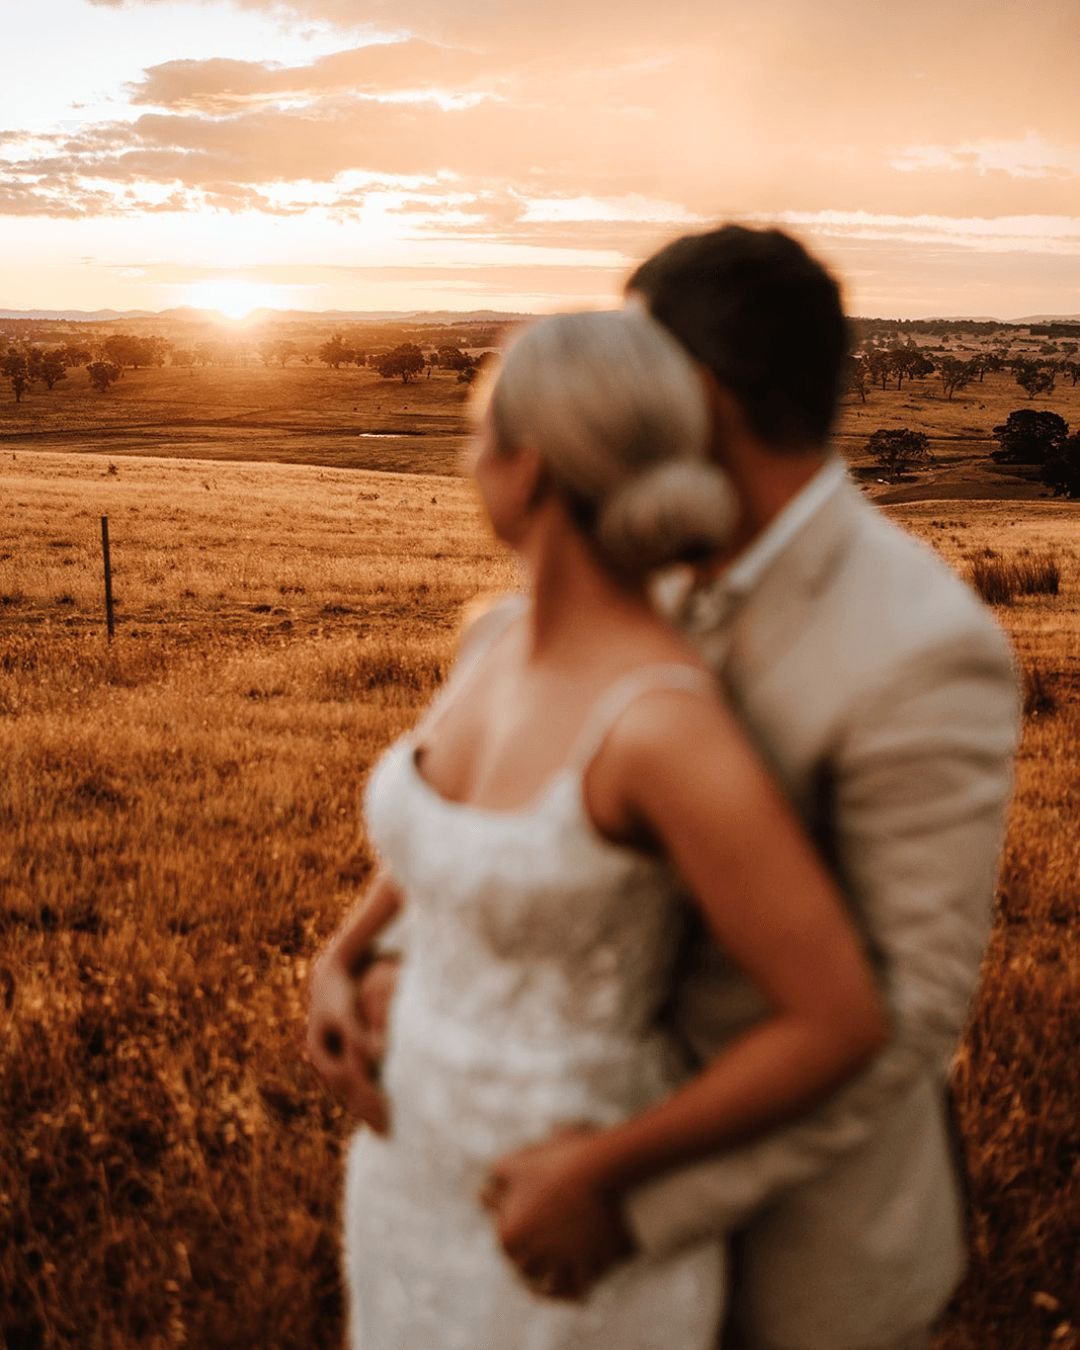 Bathed in the golden rays of the setting sun, Petrichor Farm transforms into a canvas painted with the most ethereal hues. 🌅✨ It's moments like these that remind us of life's tranquil beauty and the timeless grace of nature. We'd love for this seren